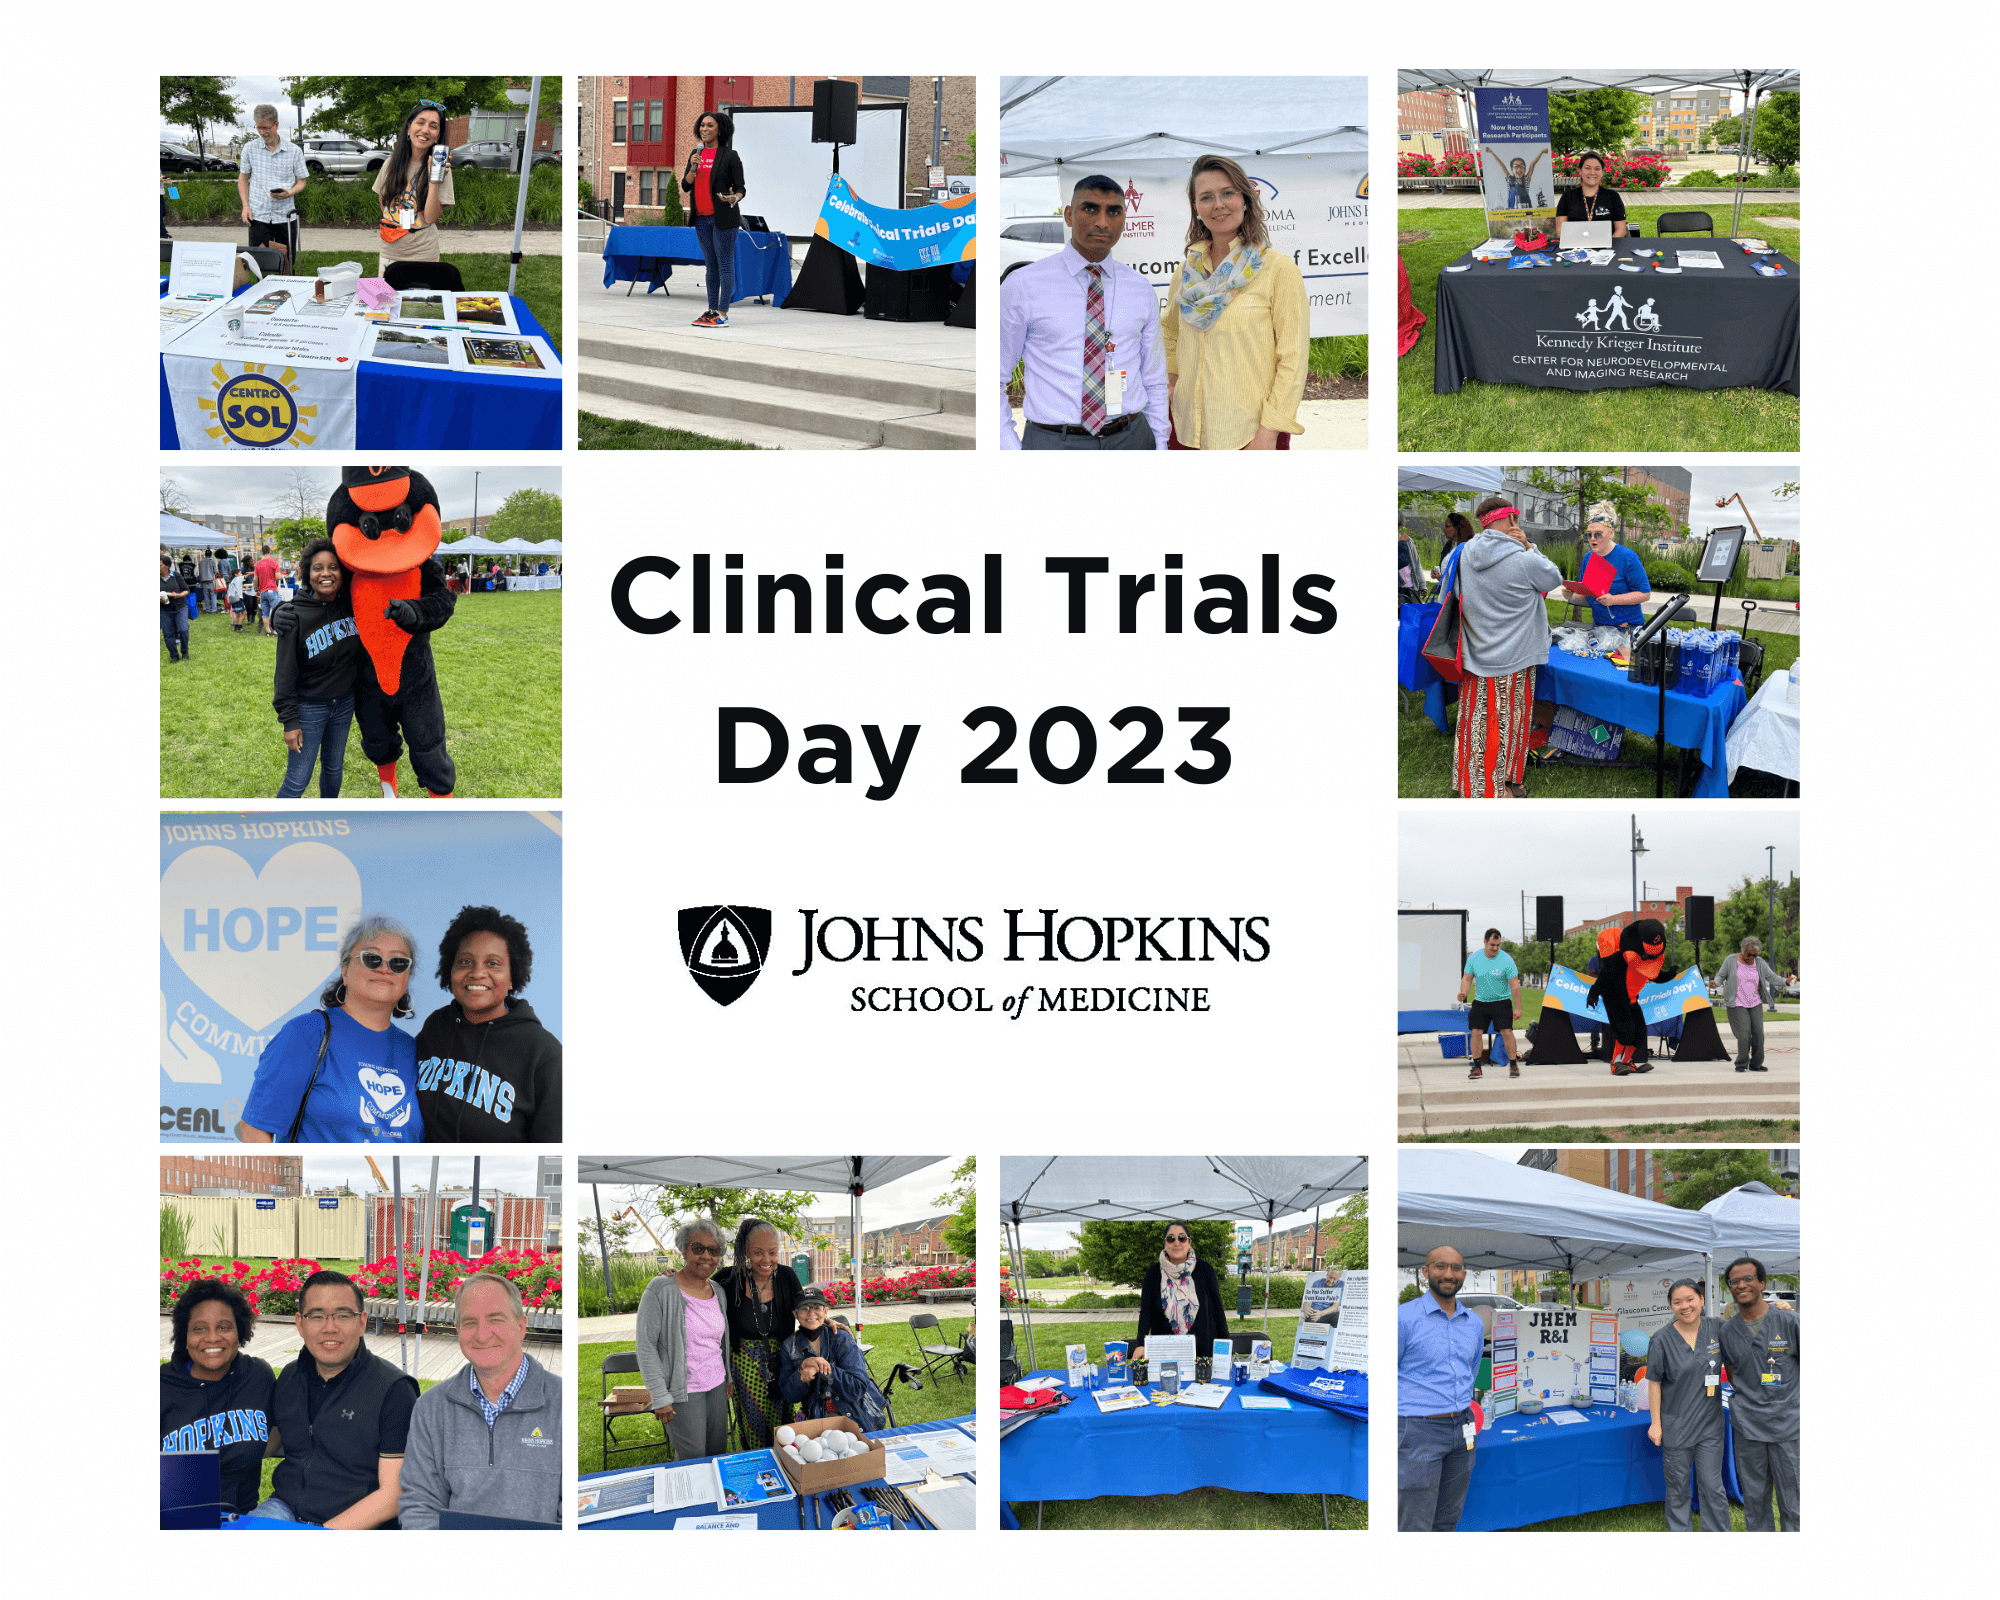 Collage of images from the inaugural Clinical Trials Day